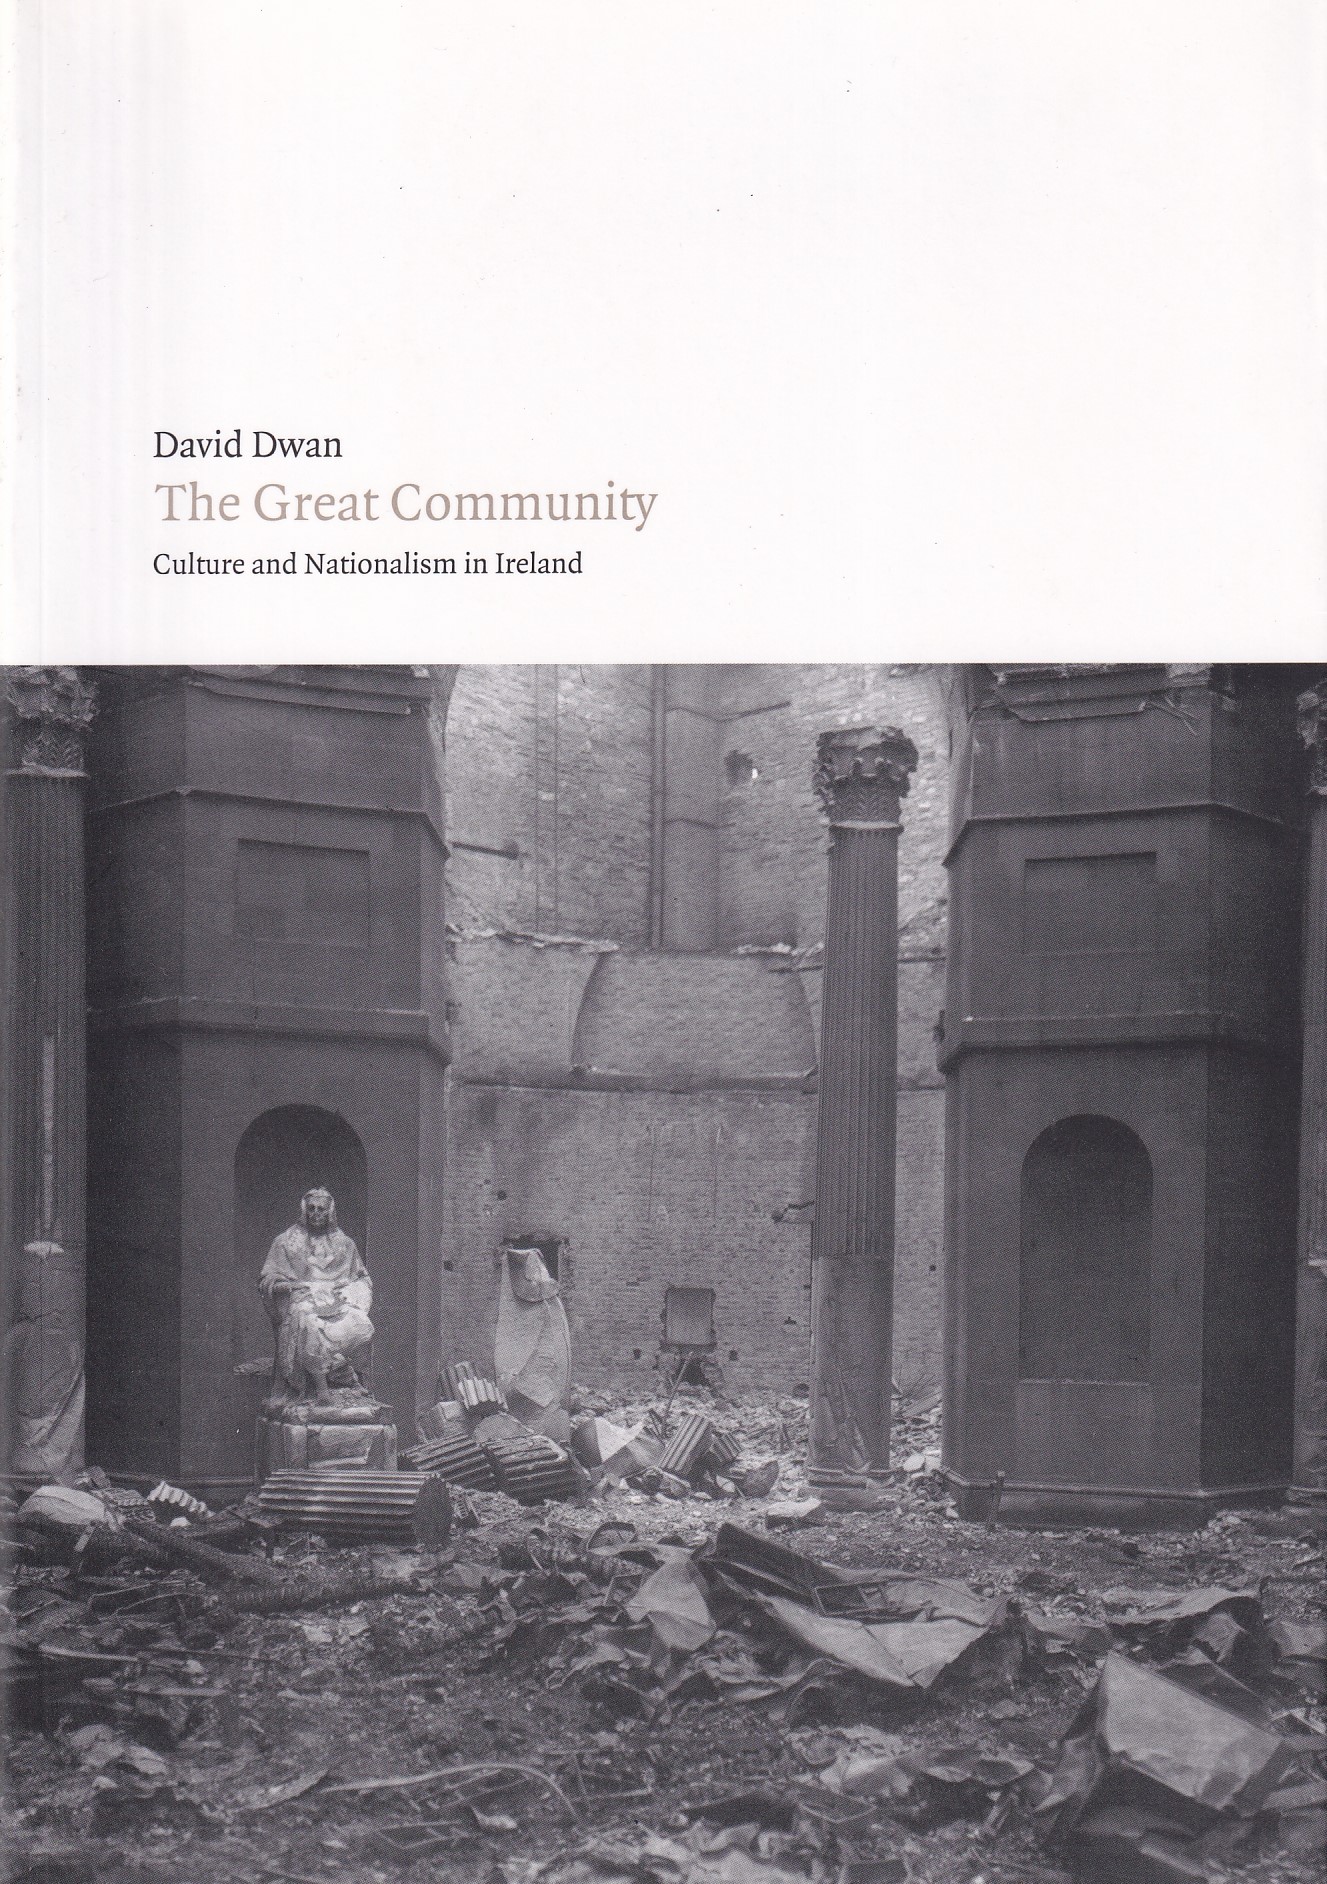 The Great Community: Culture and Nationalism in Ireland | David Dwan | Charlie Byrne's